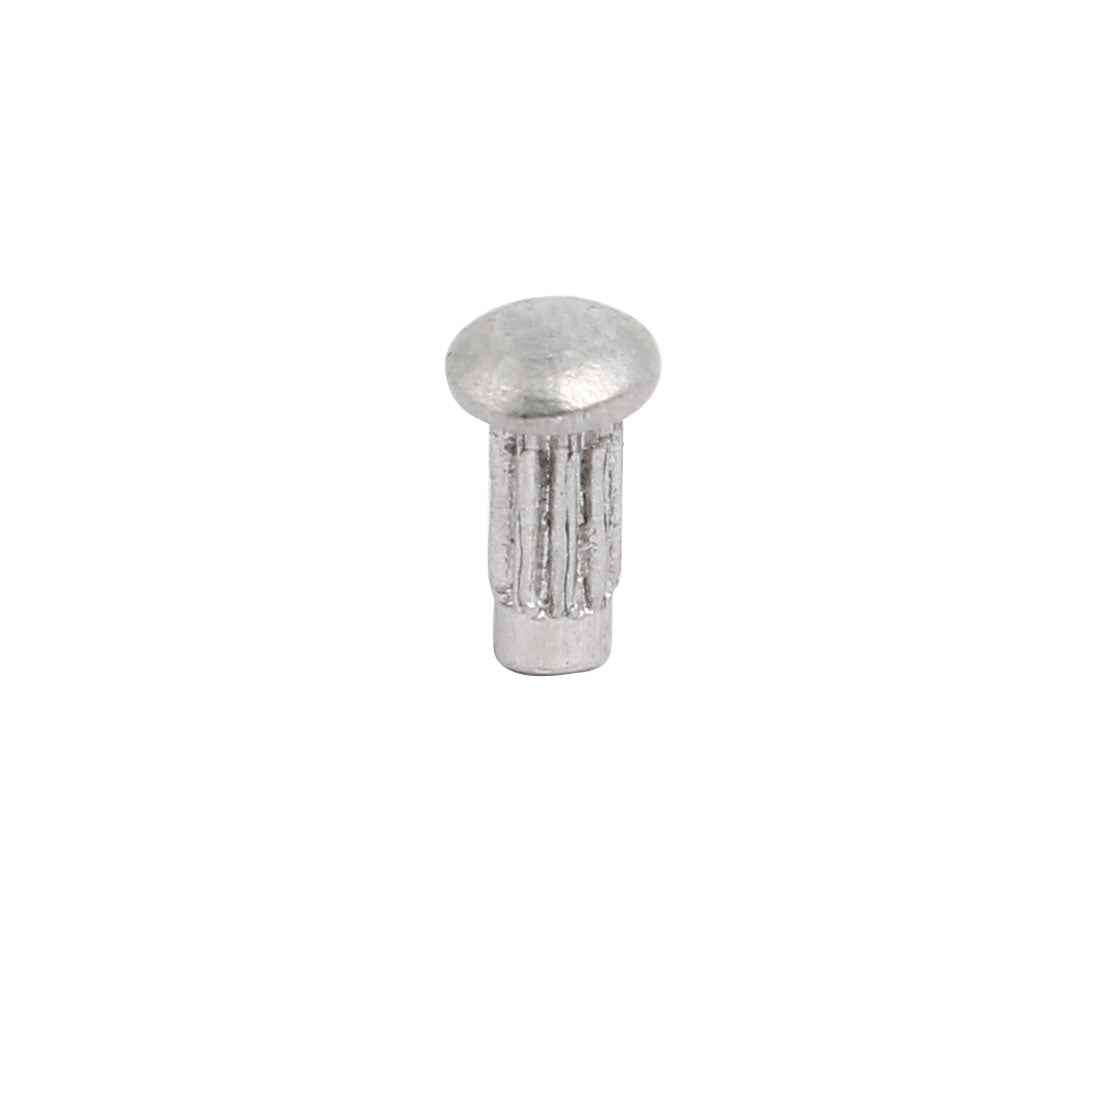 uxcell Uxcell 200pcs M2.5 x 6mm Knurled Shank Round Head Aluminum Solid Rivet Silver Tone